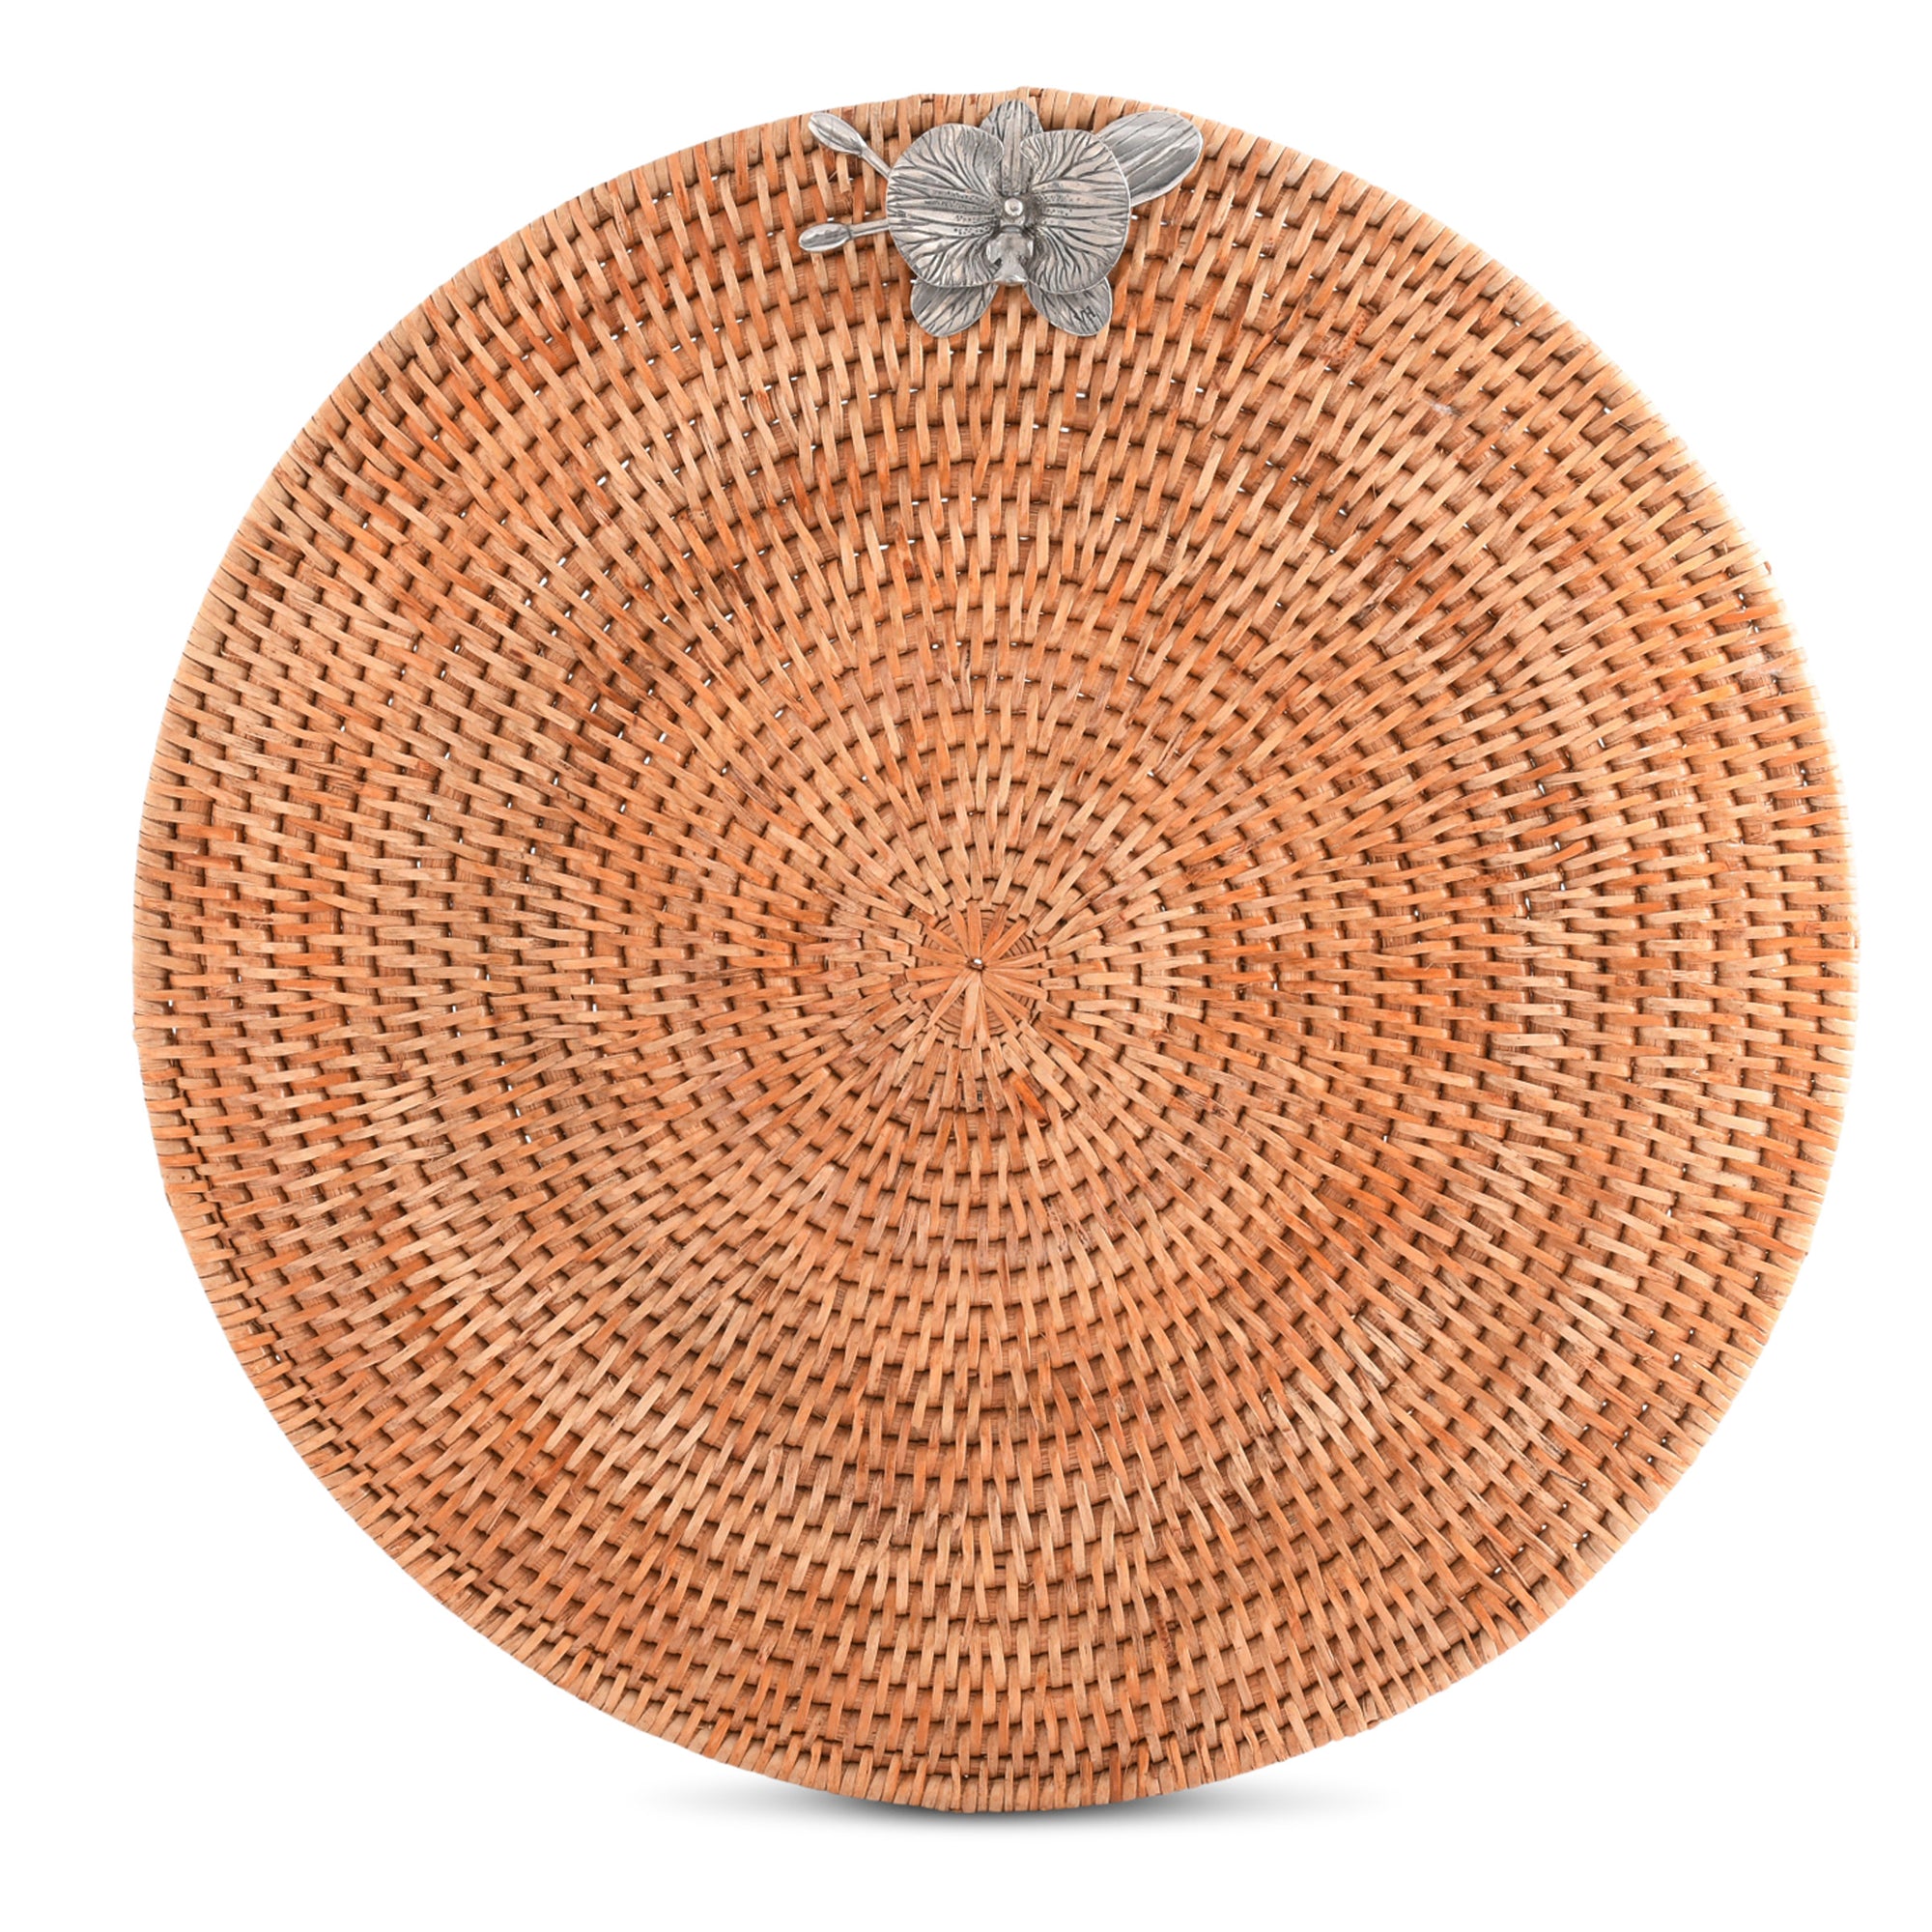 Vagabond House Orchid Placemat Hand Woven Wicker Rattan Round - Set of 4 Product Image